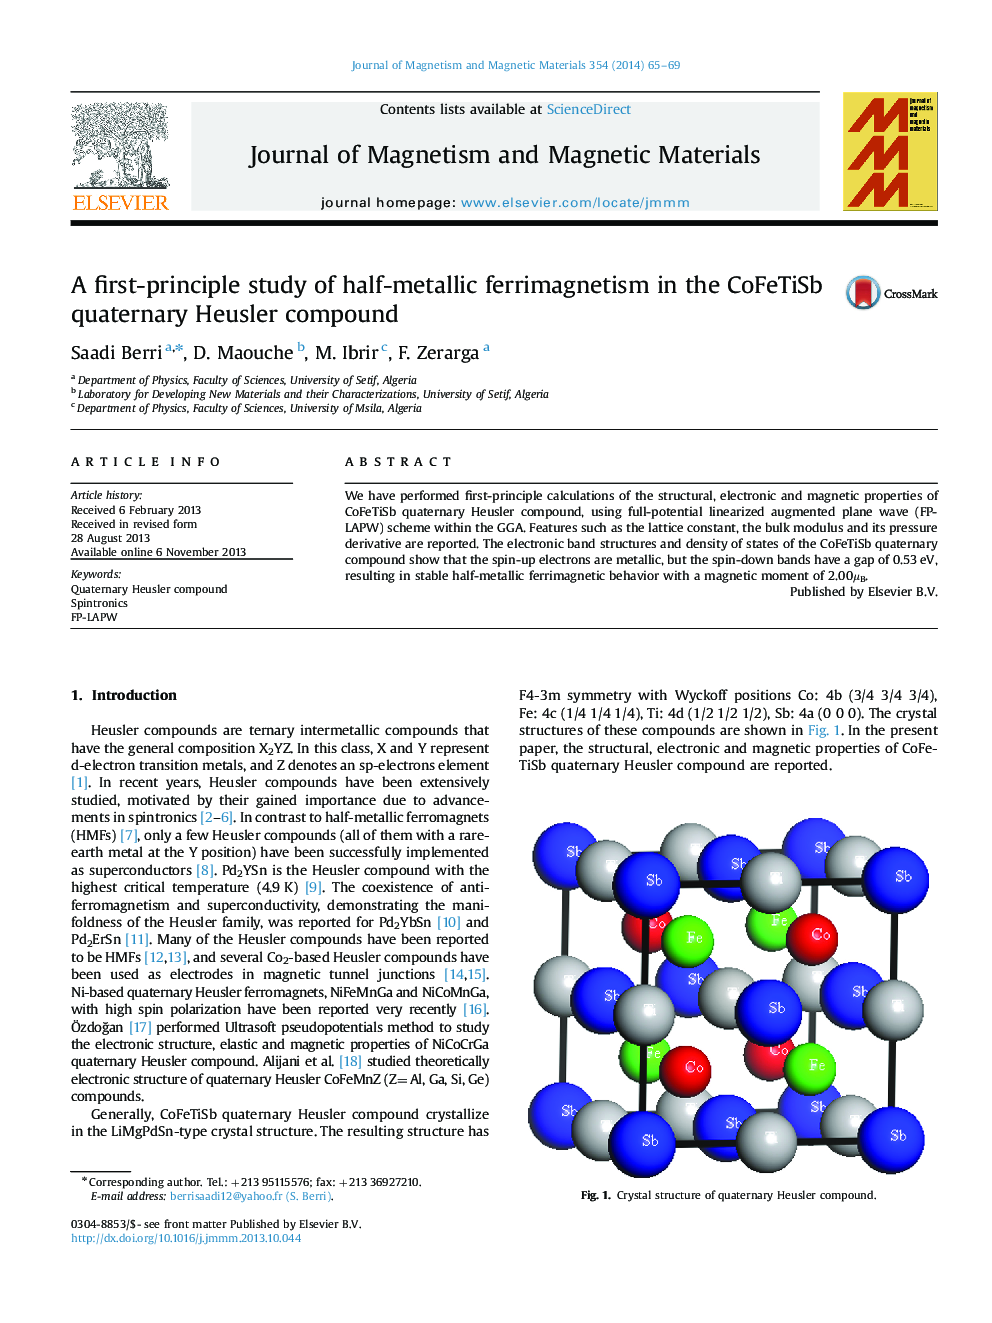 A first-principle study of half-metallic ferrimagnetism in the CoFeTiSb quaternary Heusler compound